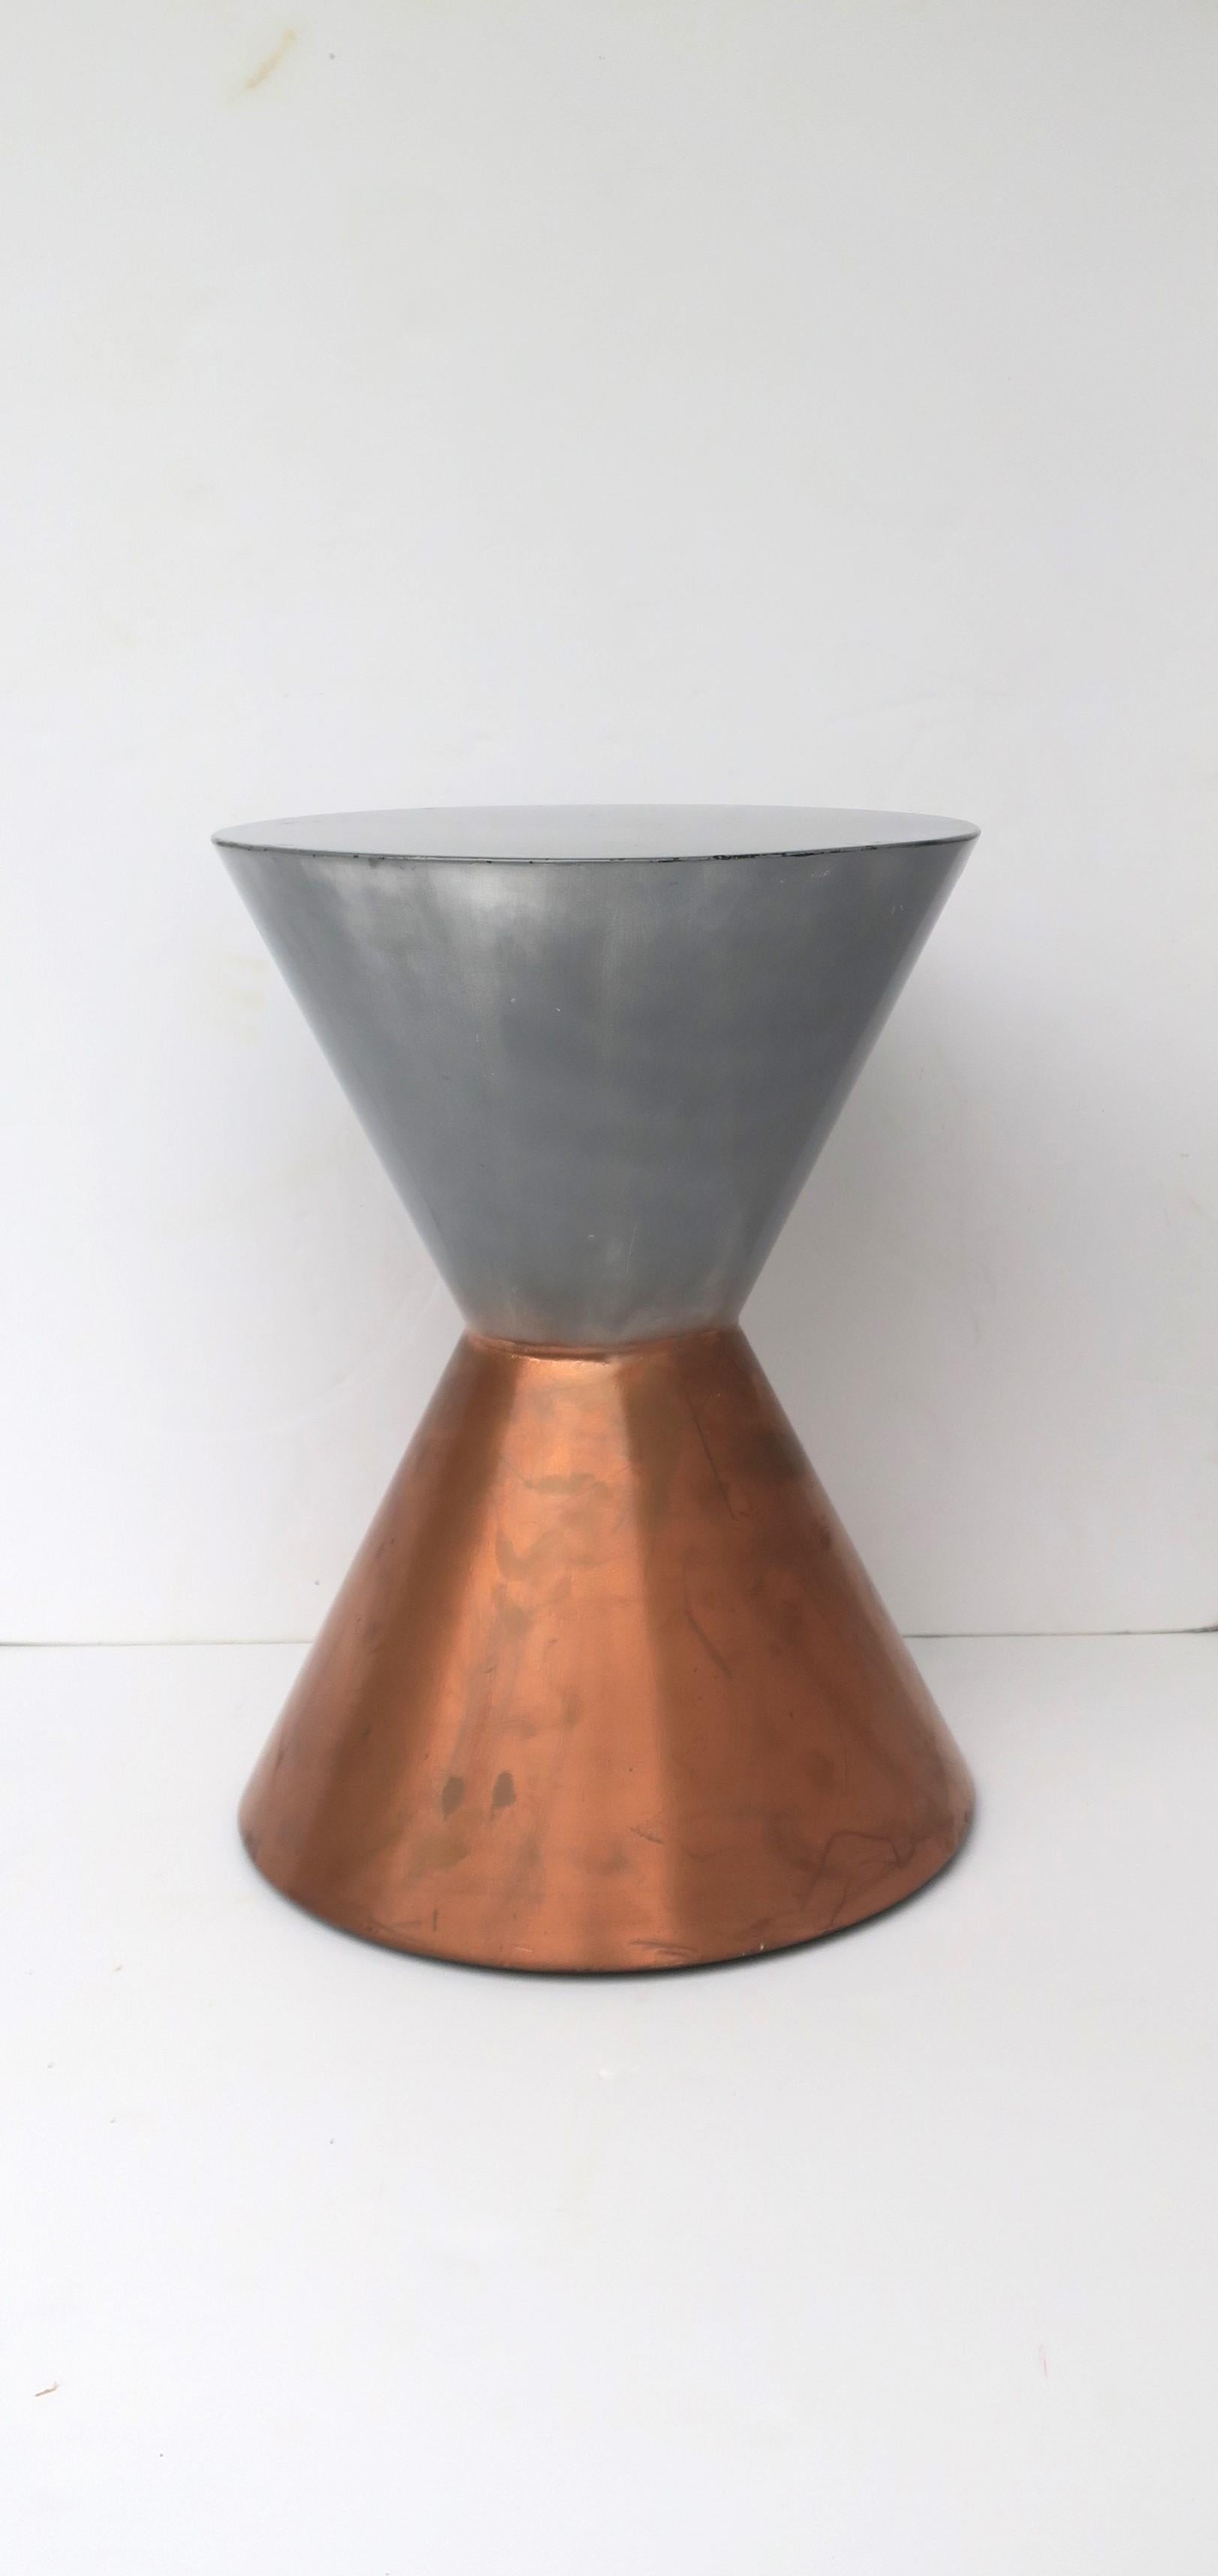 A substantial silver and copper hued hourglass side drinks table, circa late-20th century. Table has a weighted base for stability. A great table for drinks, cocktails, etc. Piece is a convenient size. Dimensions: 15